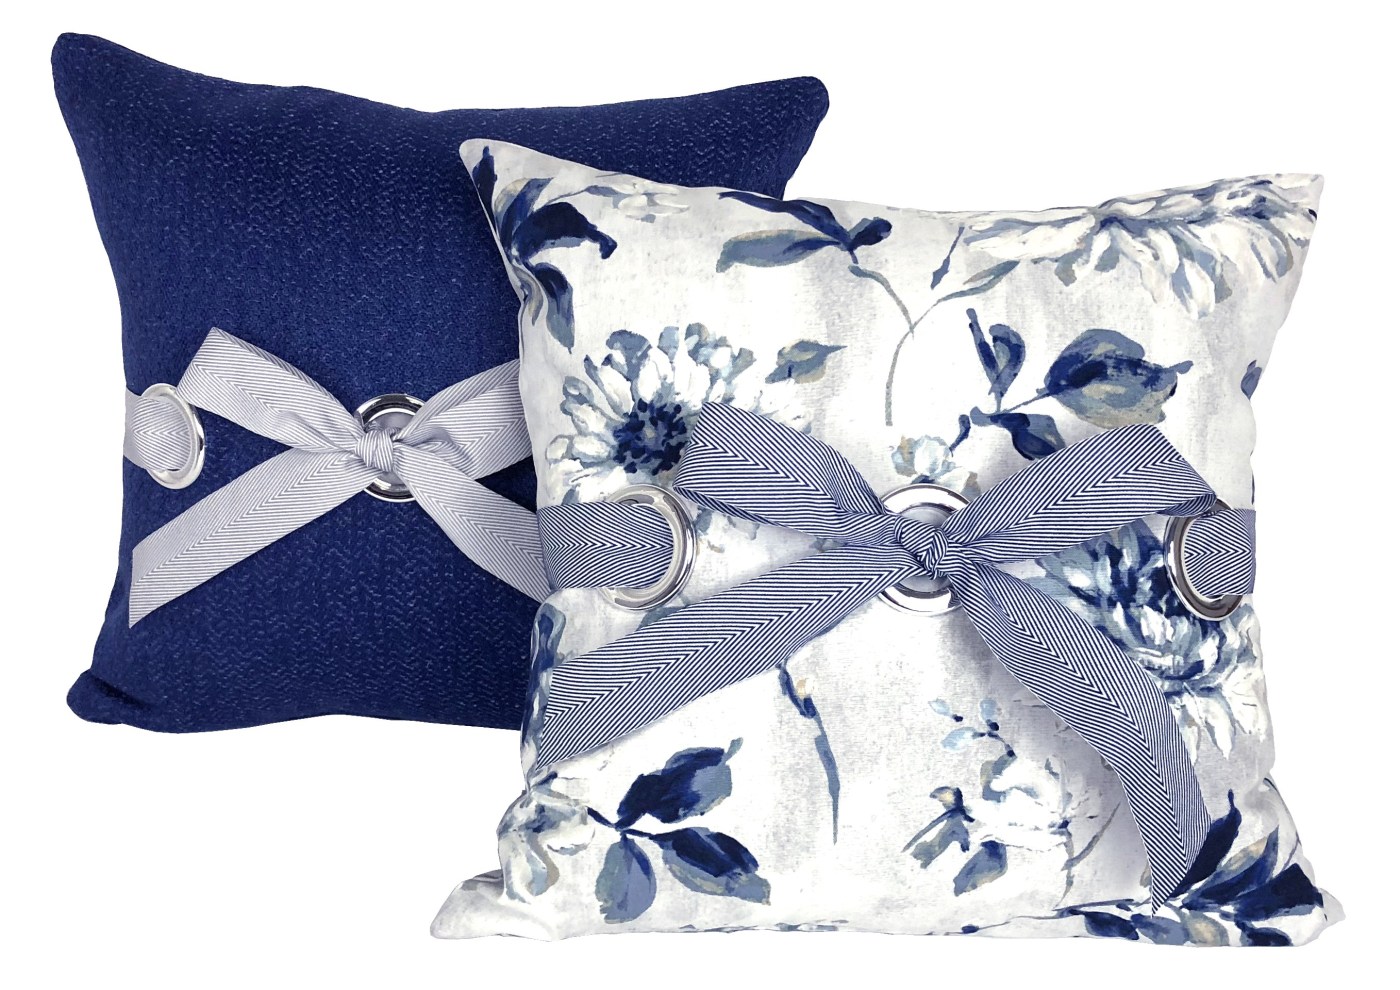 Closeup of completed blue-white grommet cushions with blue-white chevron ribbons